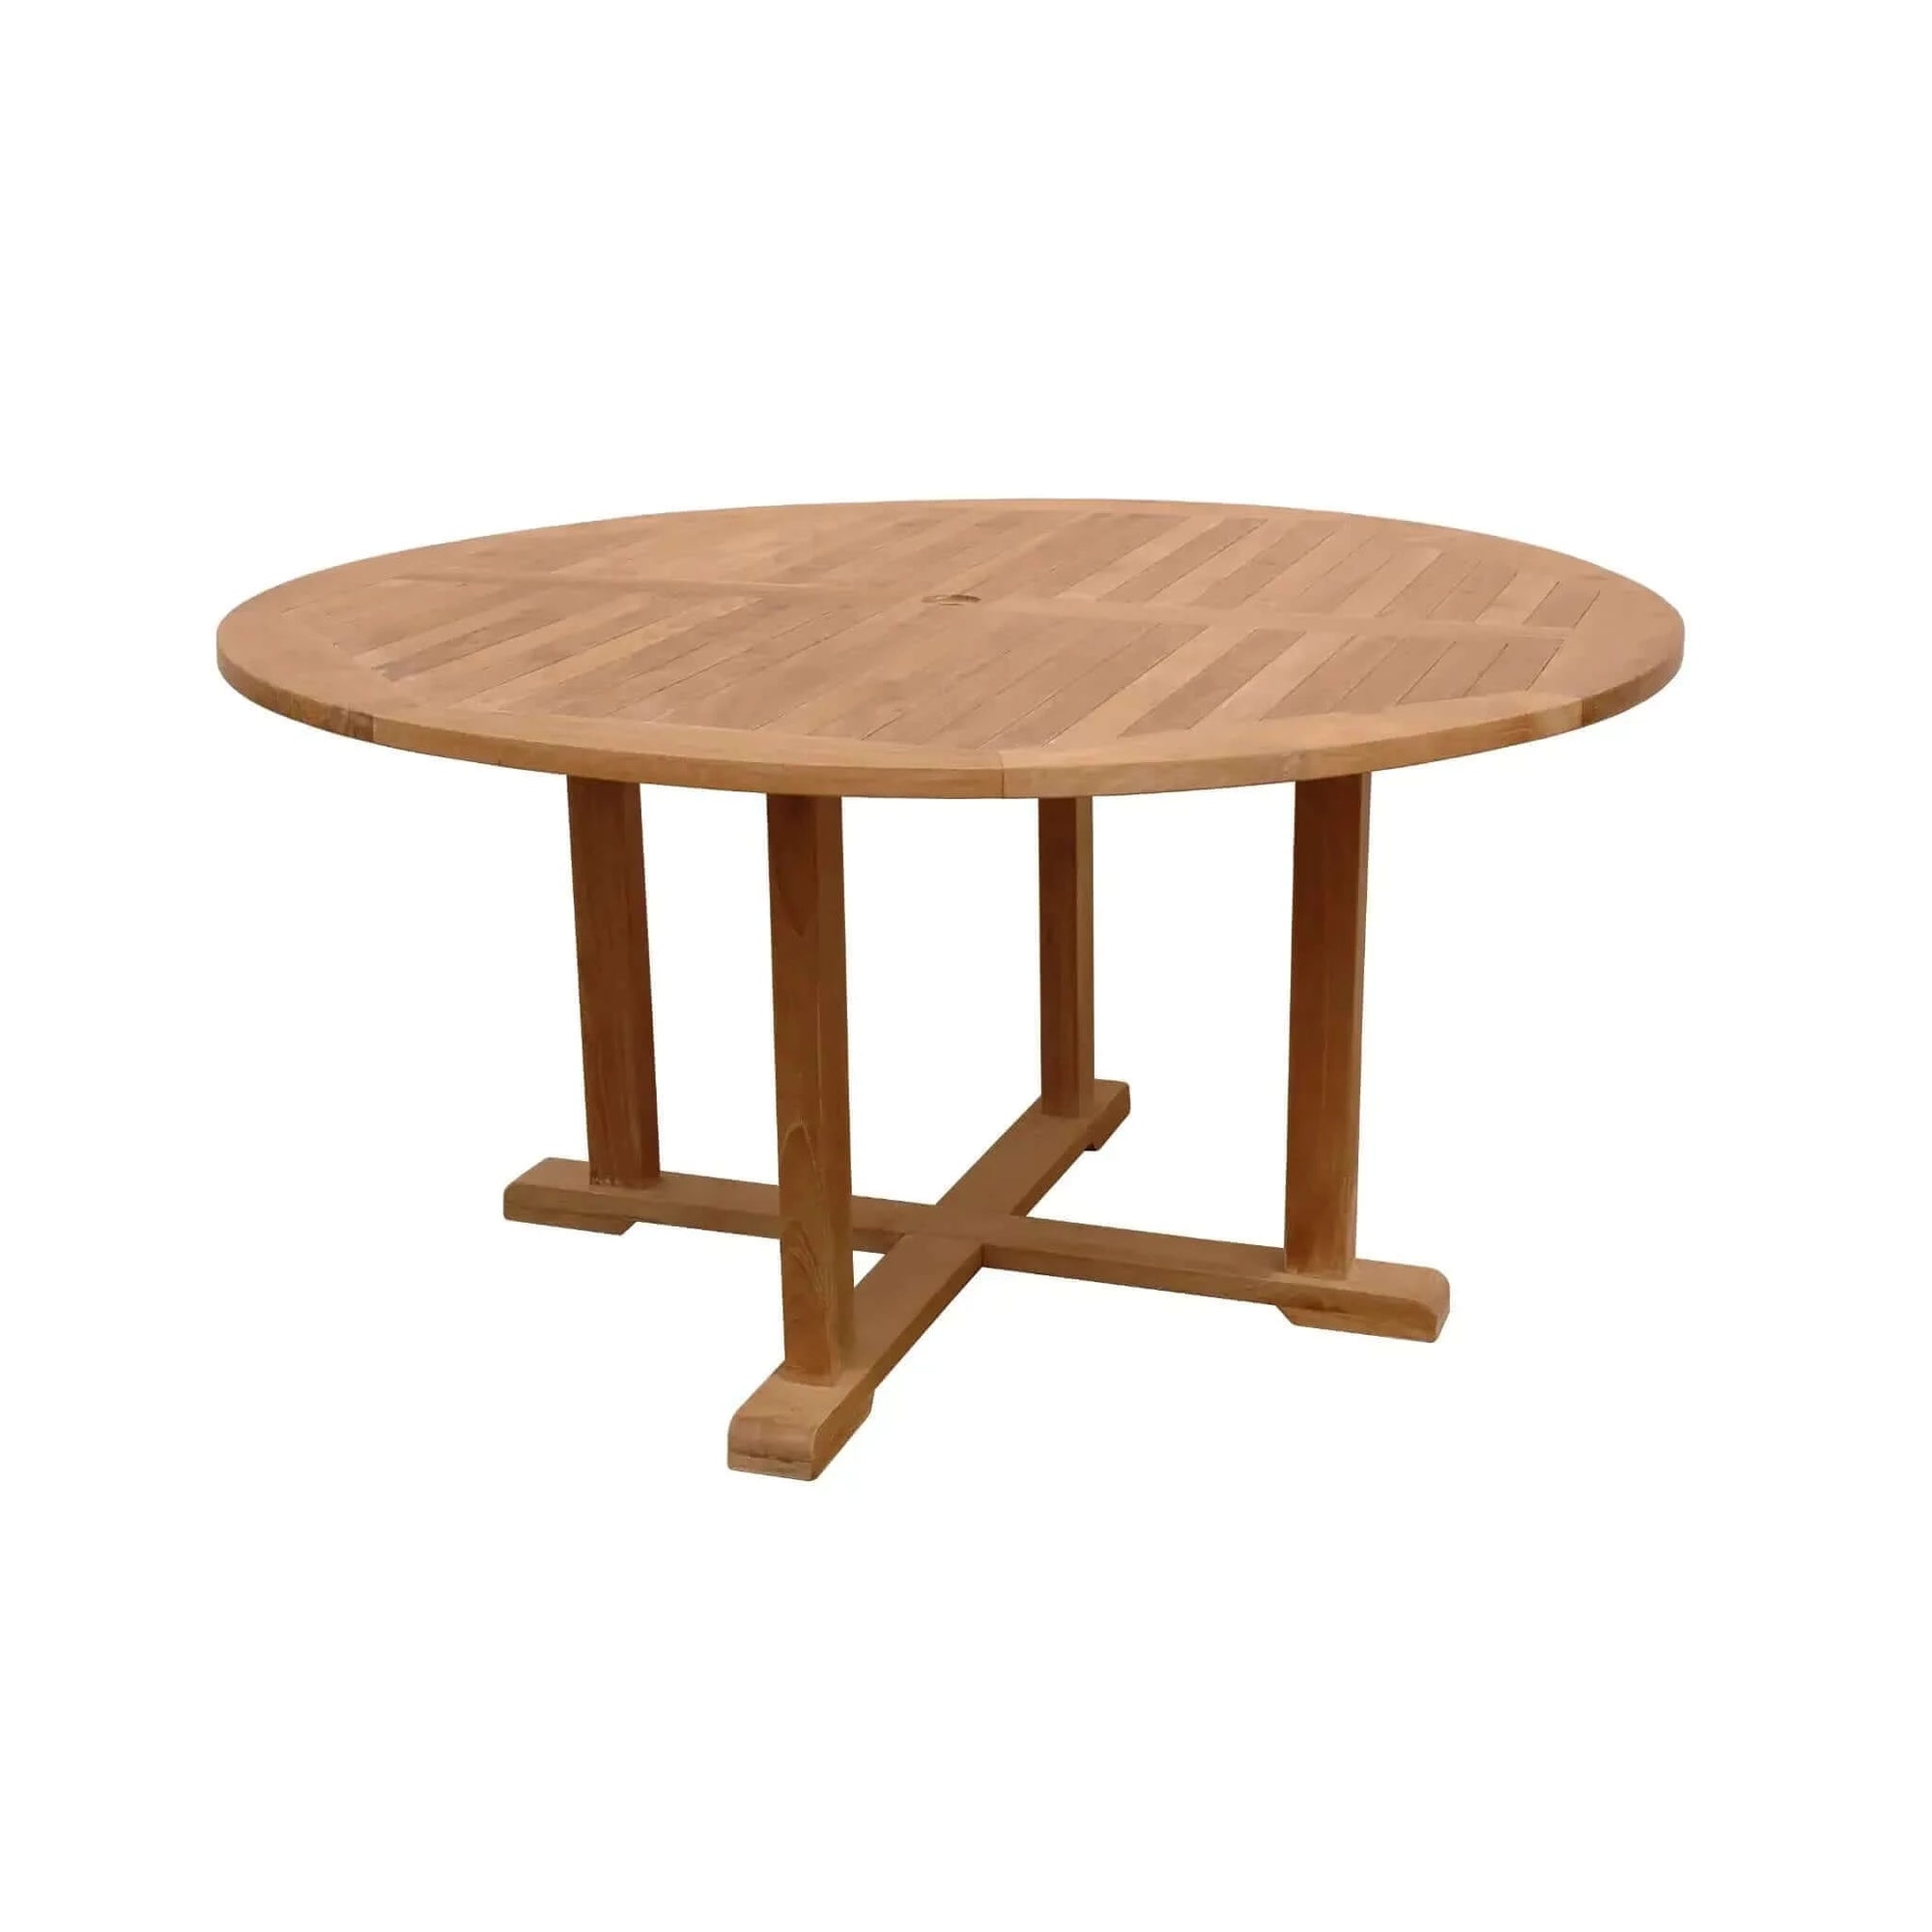 Anderson Teak Tosca 5-Foot Round Table